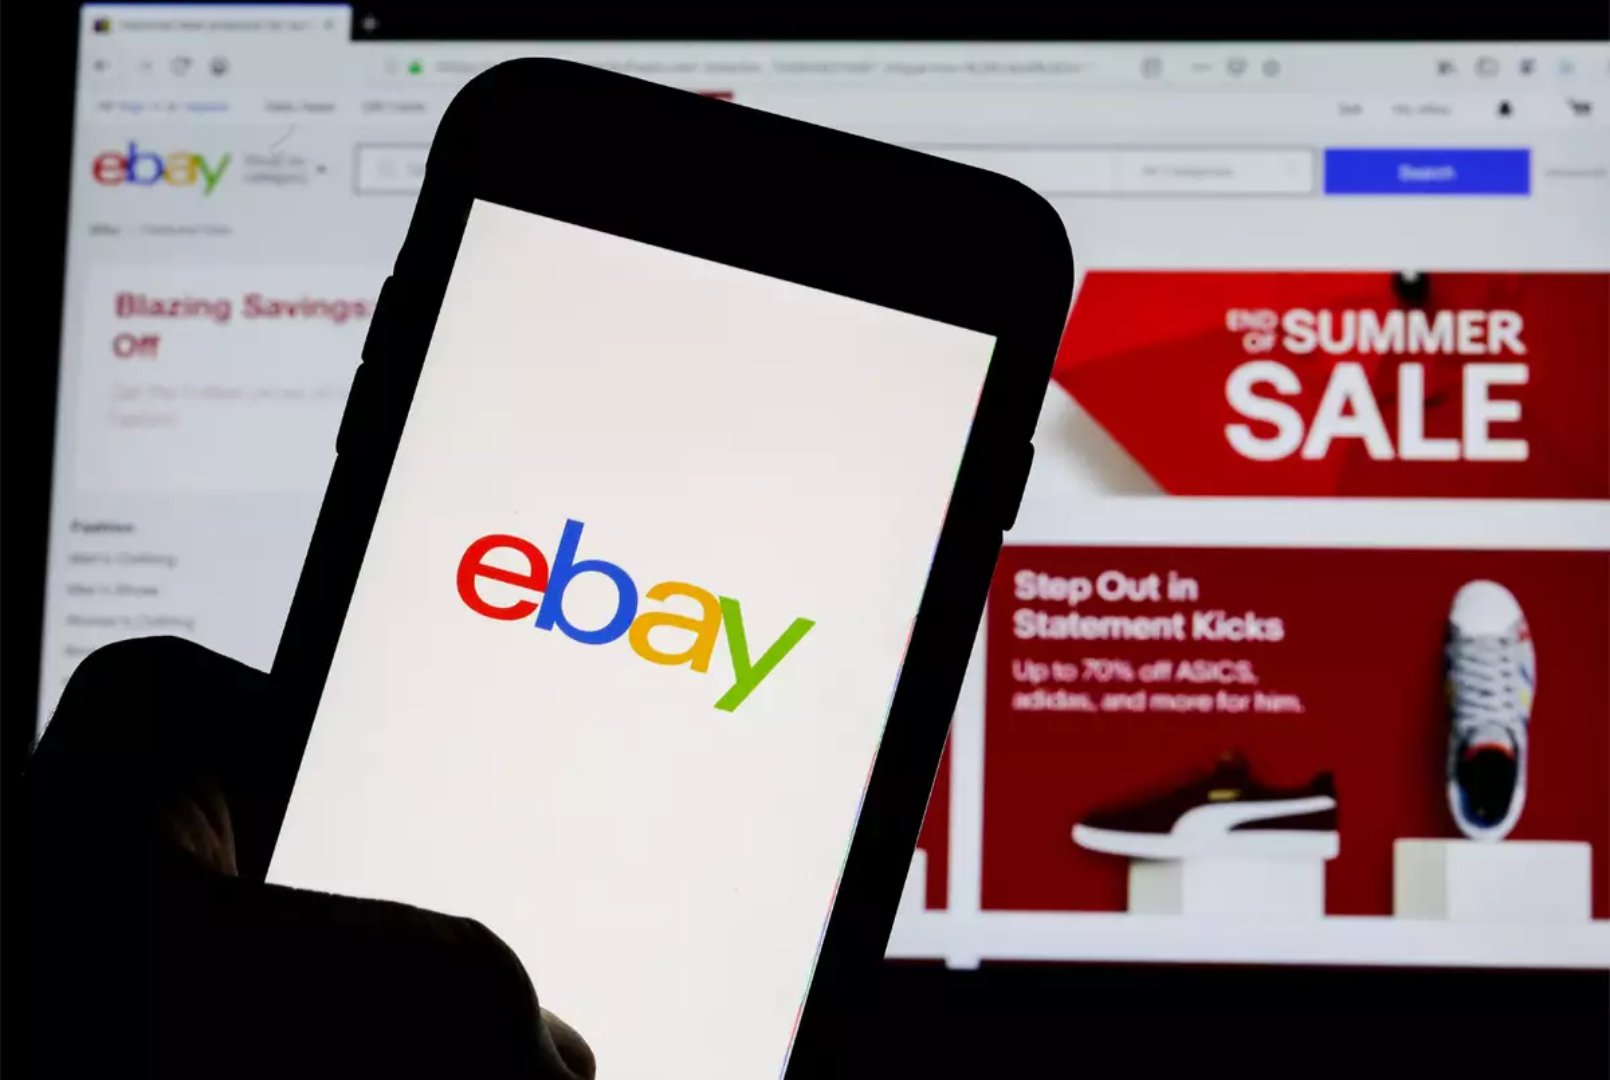 US Woman To Pay $3.8M For Selling Stolen Goods On eBay For 19 Years